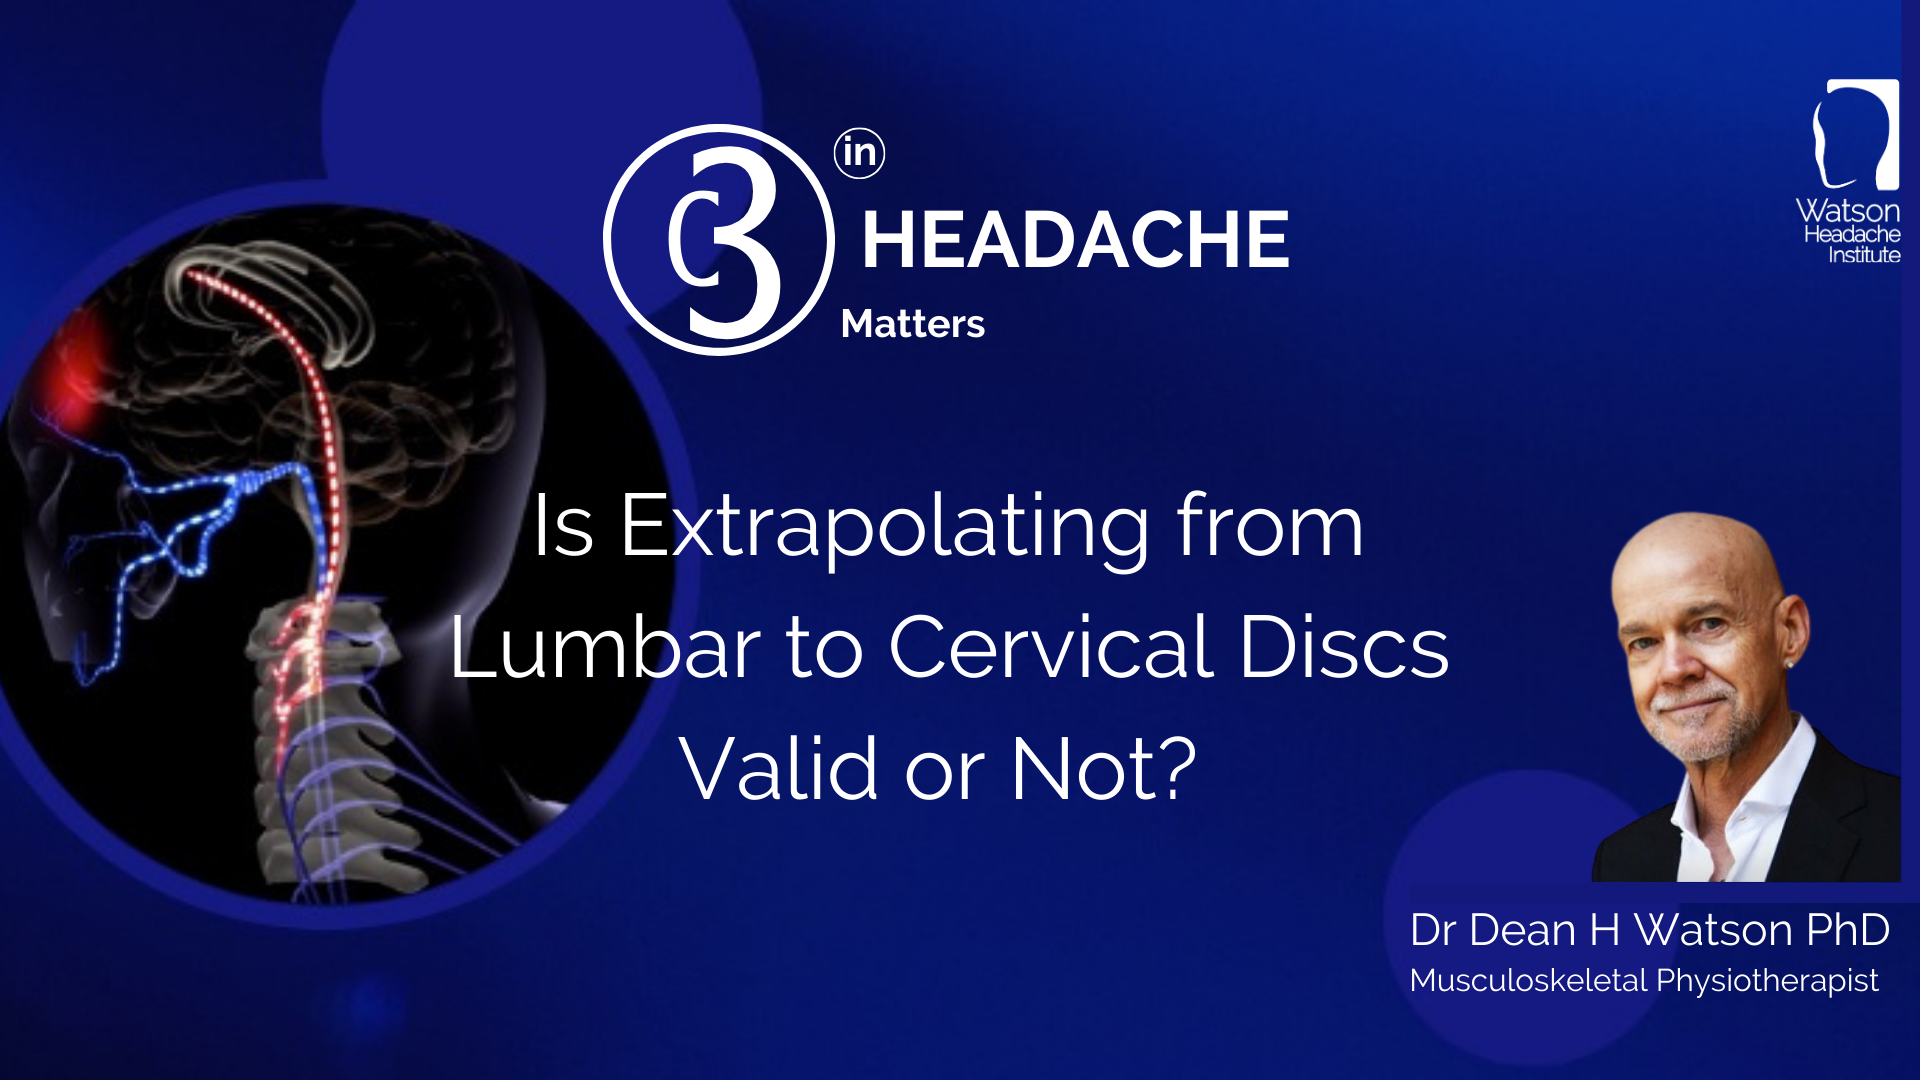 Is Extrapolating from Lumbar to Cervical Discs Valid or Not?